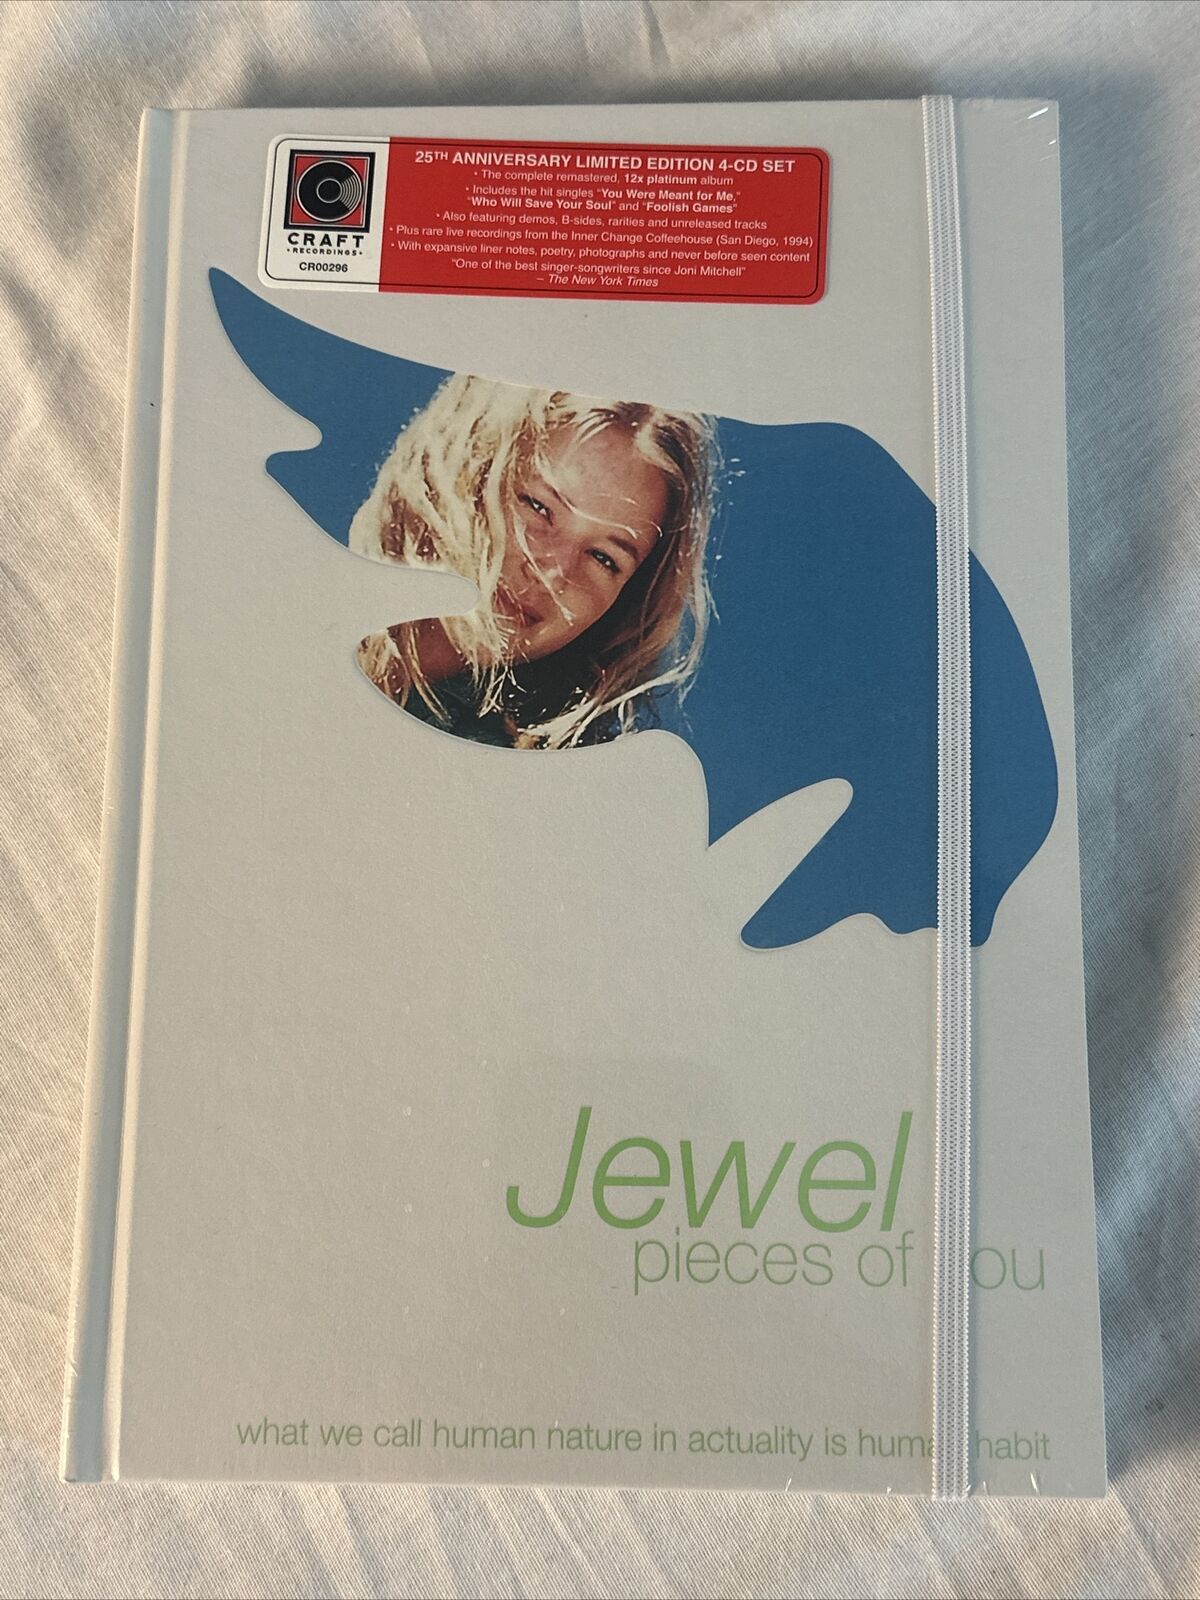 Pieces Of You (25th Anniversary Edition) by Jewel (4 CD Set, 2020)